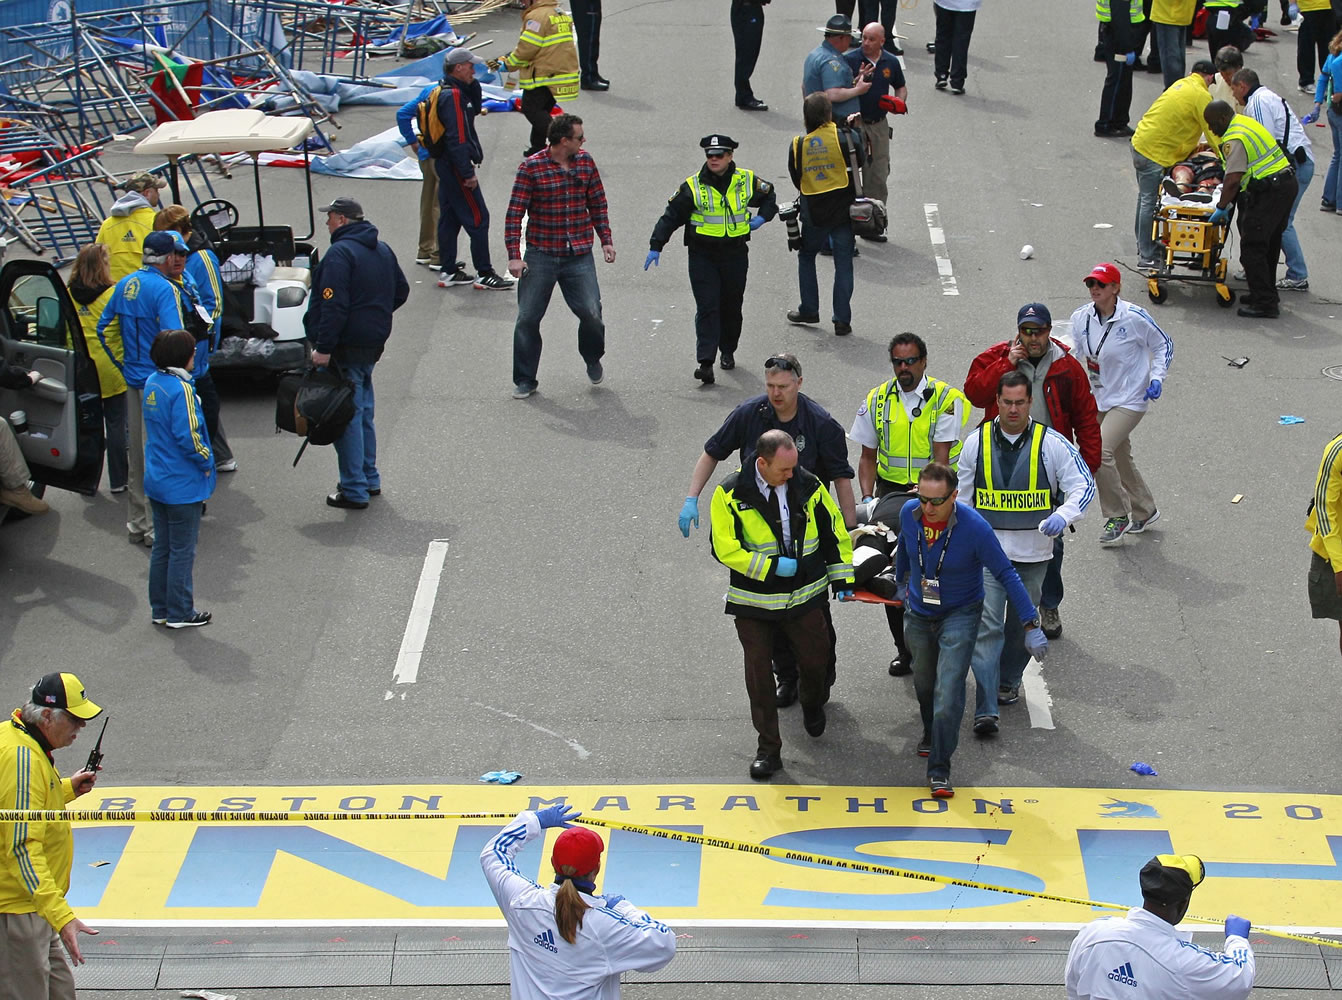 Medical workers wheel the injured across the finish line during the 2013 Boston Marathon following an explosion in Boston on Monday.